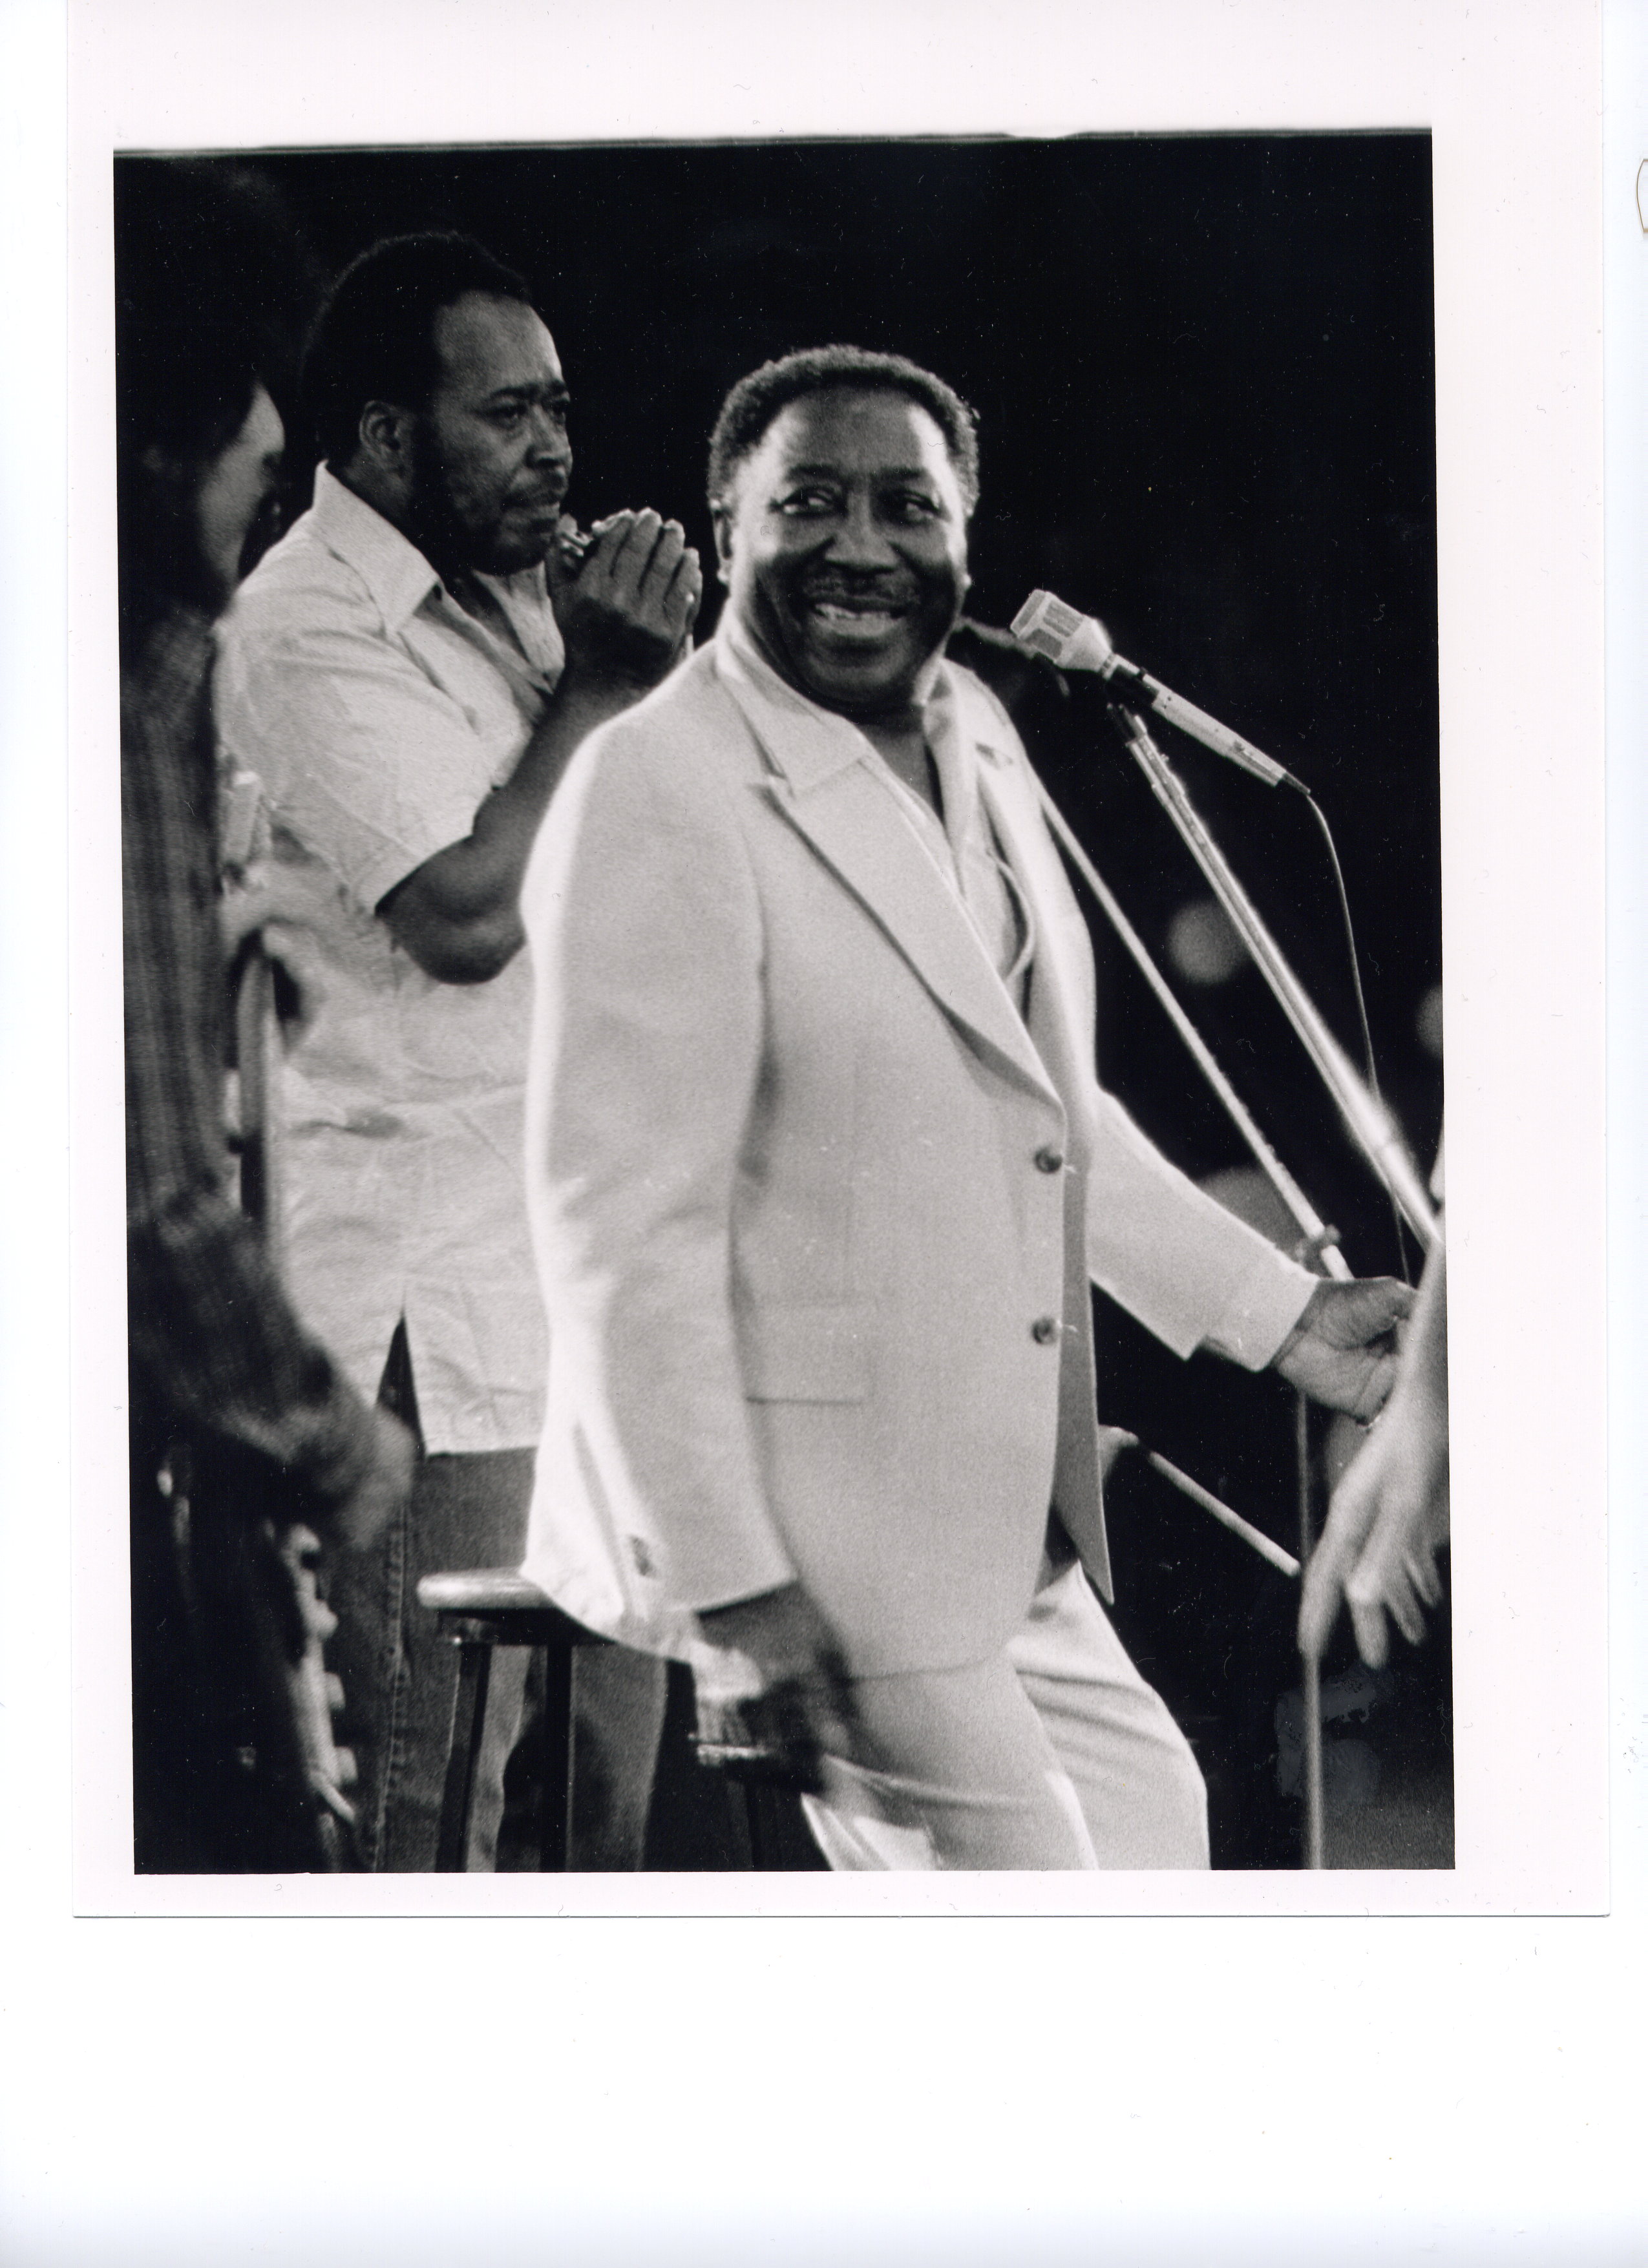 Muddy Waters performing. By Jean-Luc Ourlin from Toronto ontario, Canada - Muddy Waters (with James Cotton), CC BY-SA 2.0, https://commons.wikimedia.org/w/index.php?curid=47455750